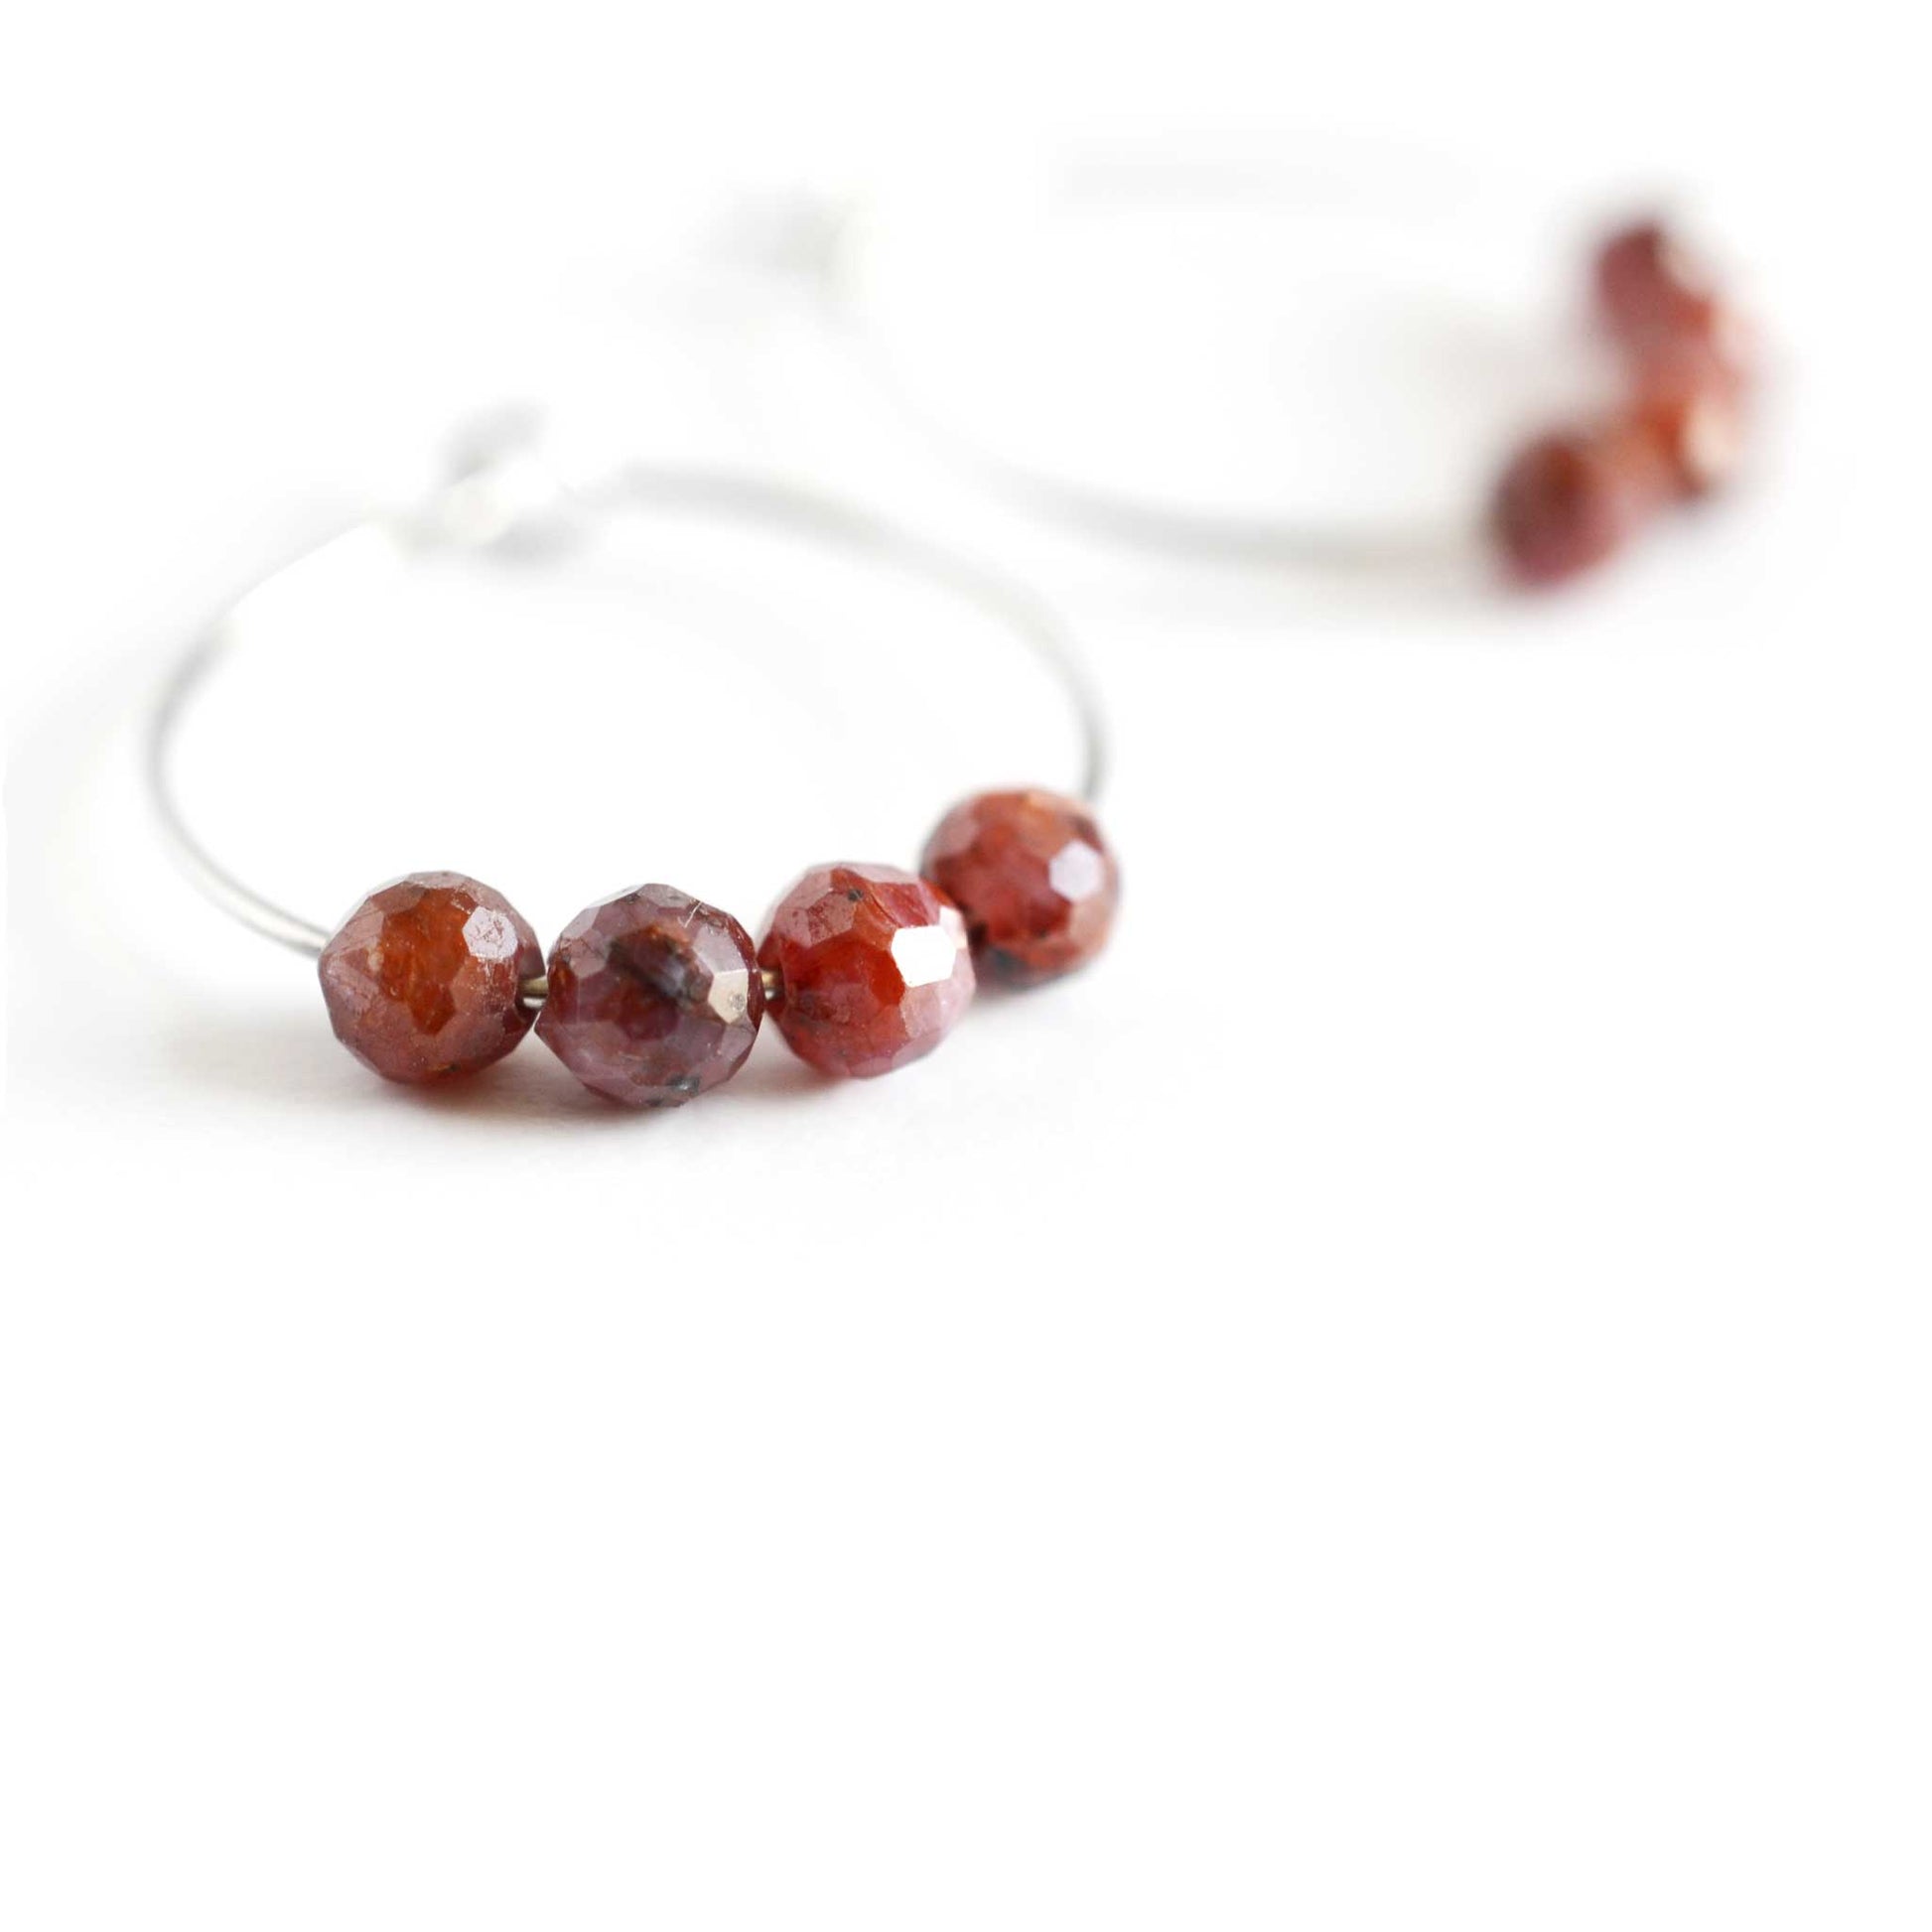 Close up of hoop earrings with Ruby stone beads